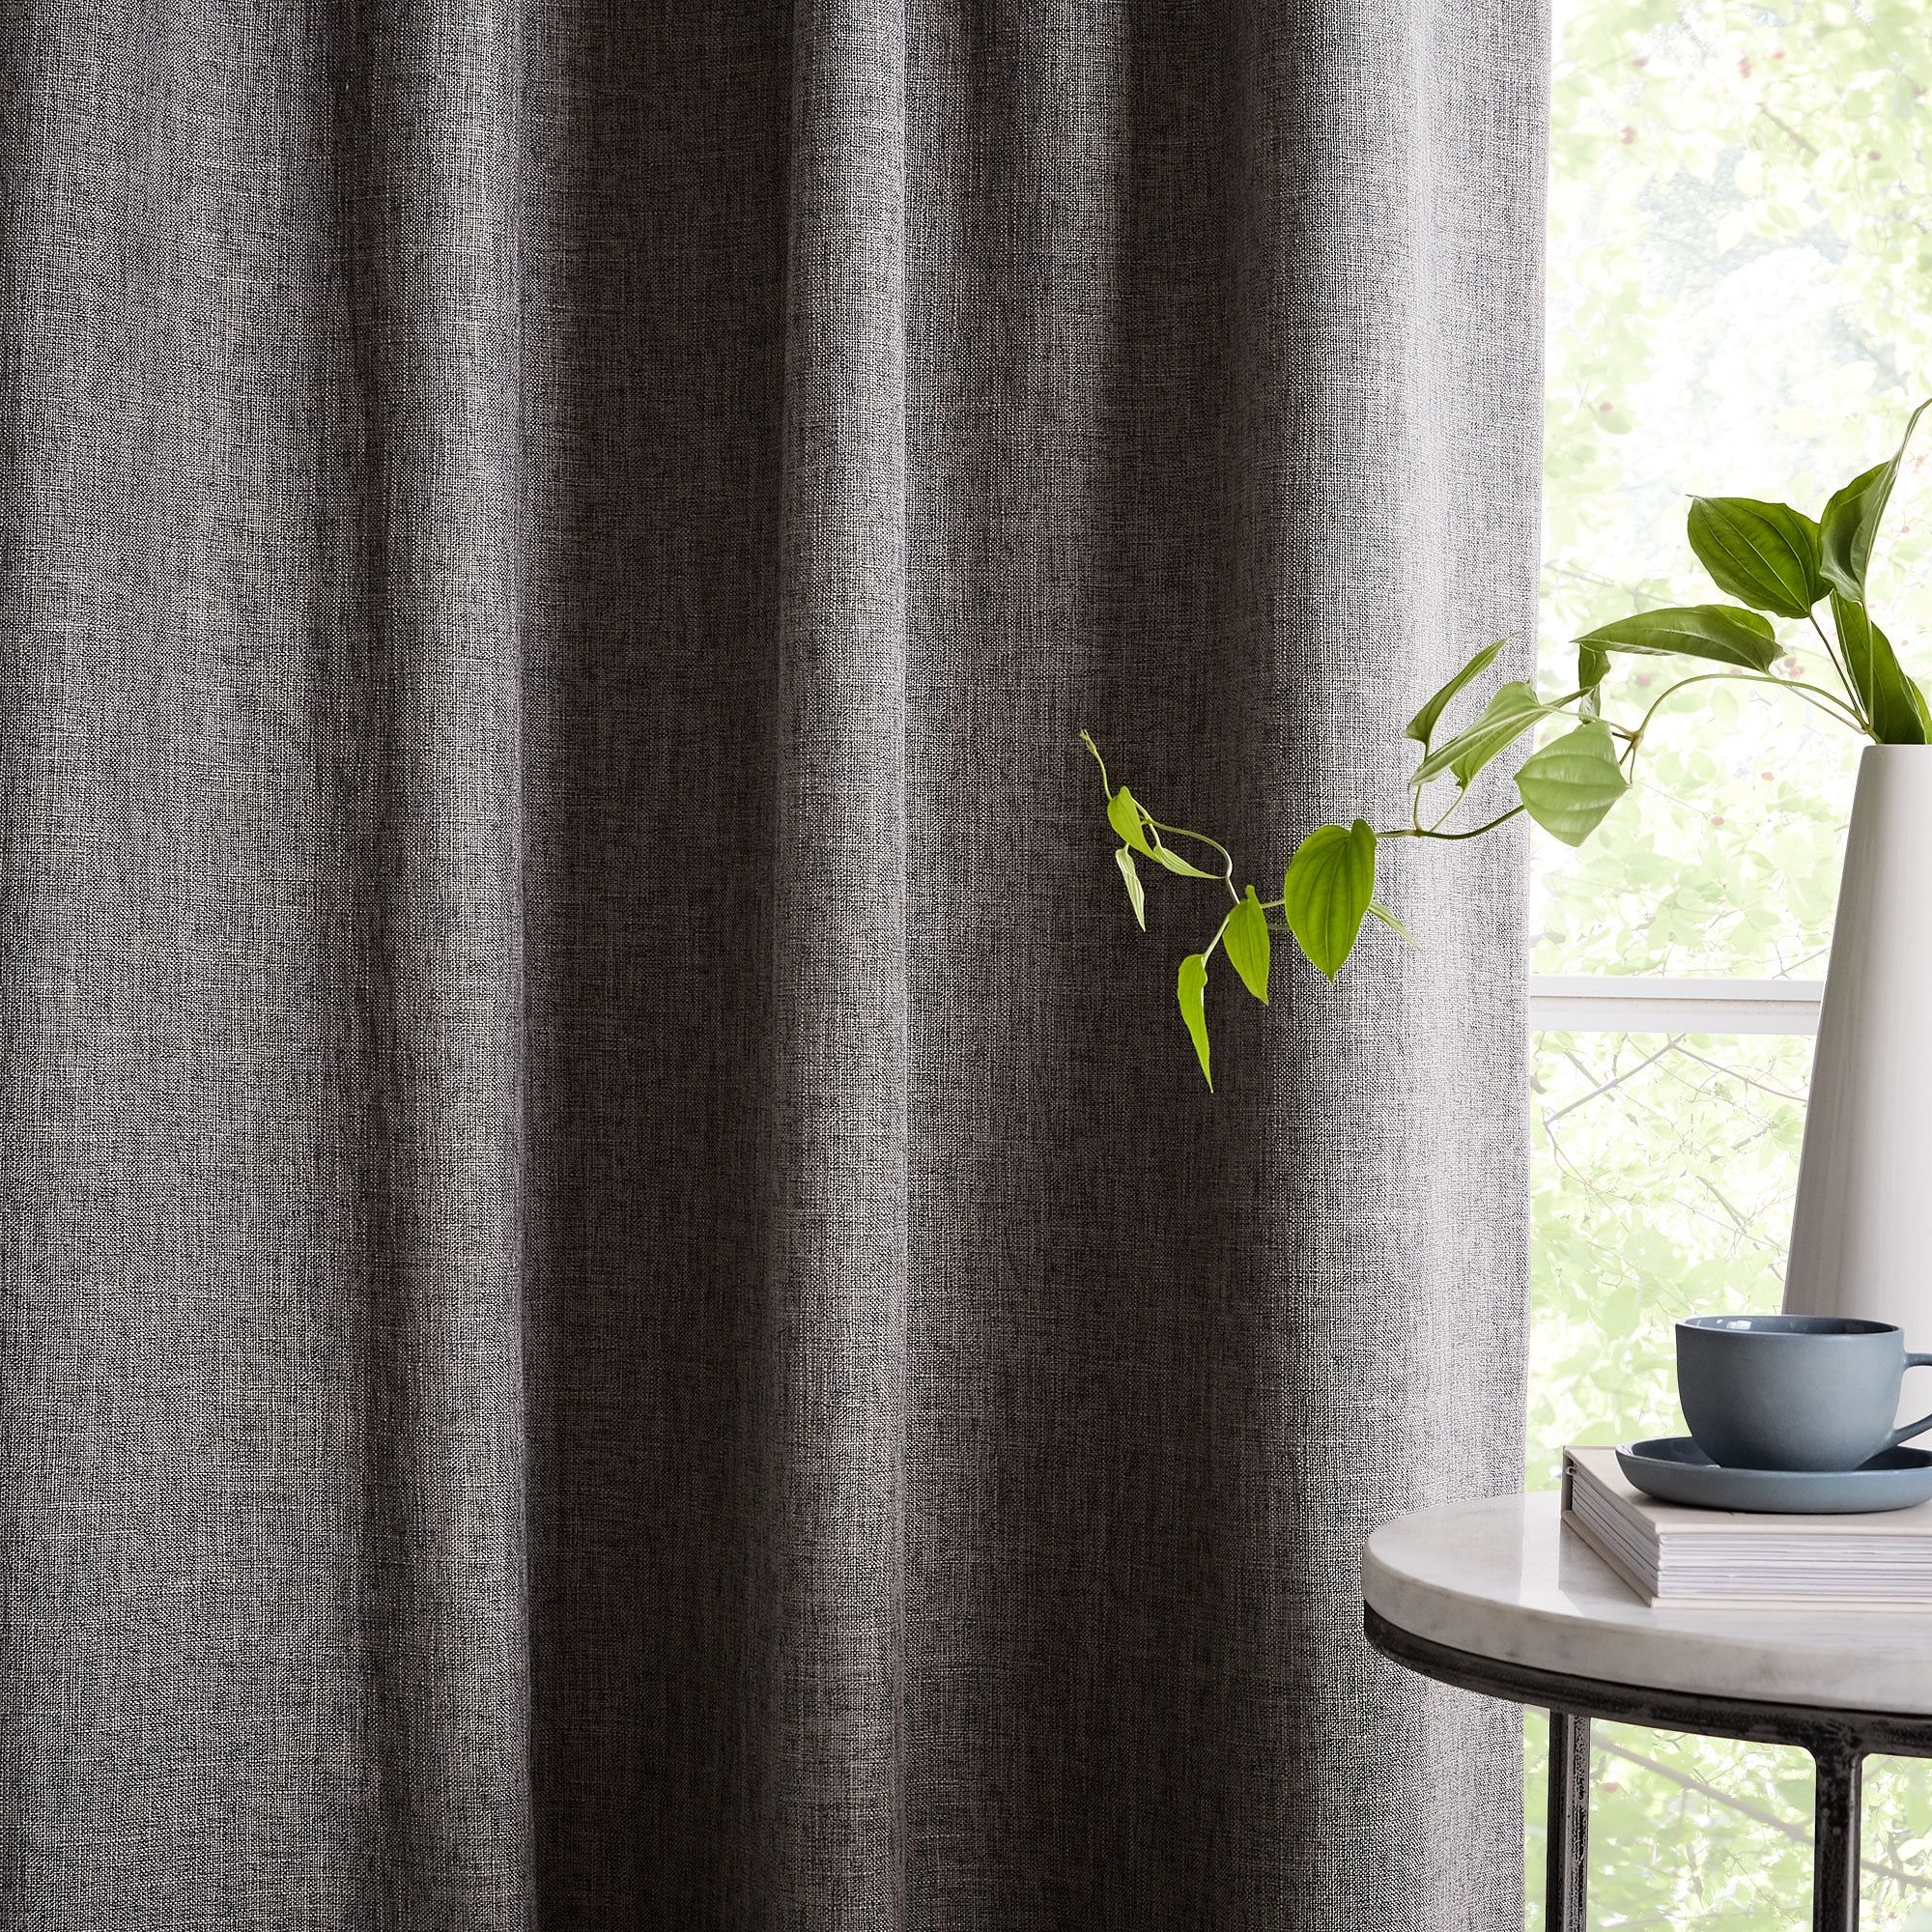 Crossweave Curtain with Blackout Lining, Charcoal, 48"x96", Set of 2 - Image 1